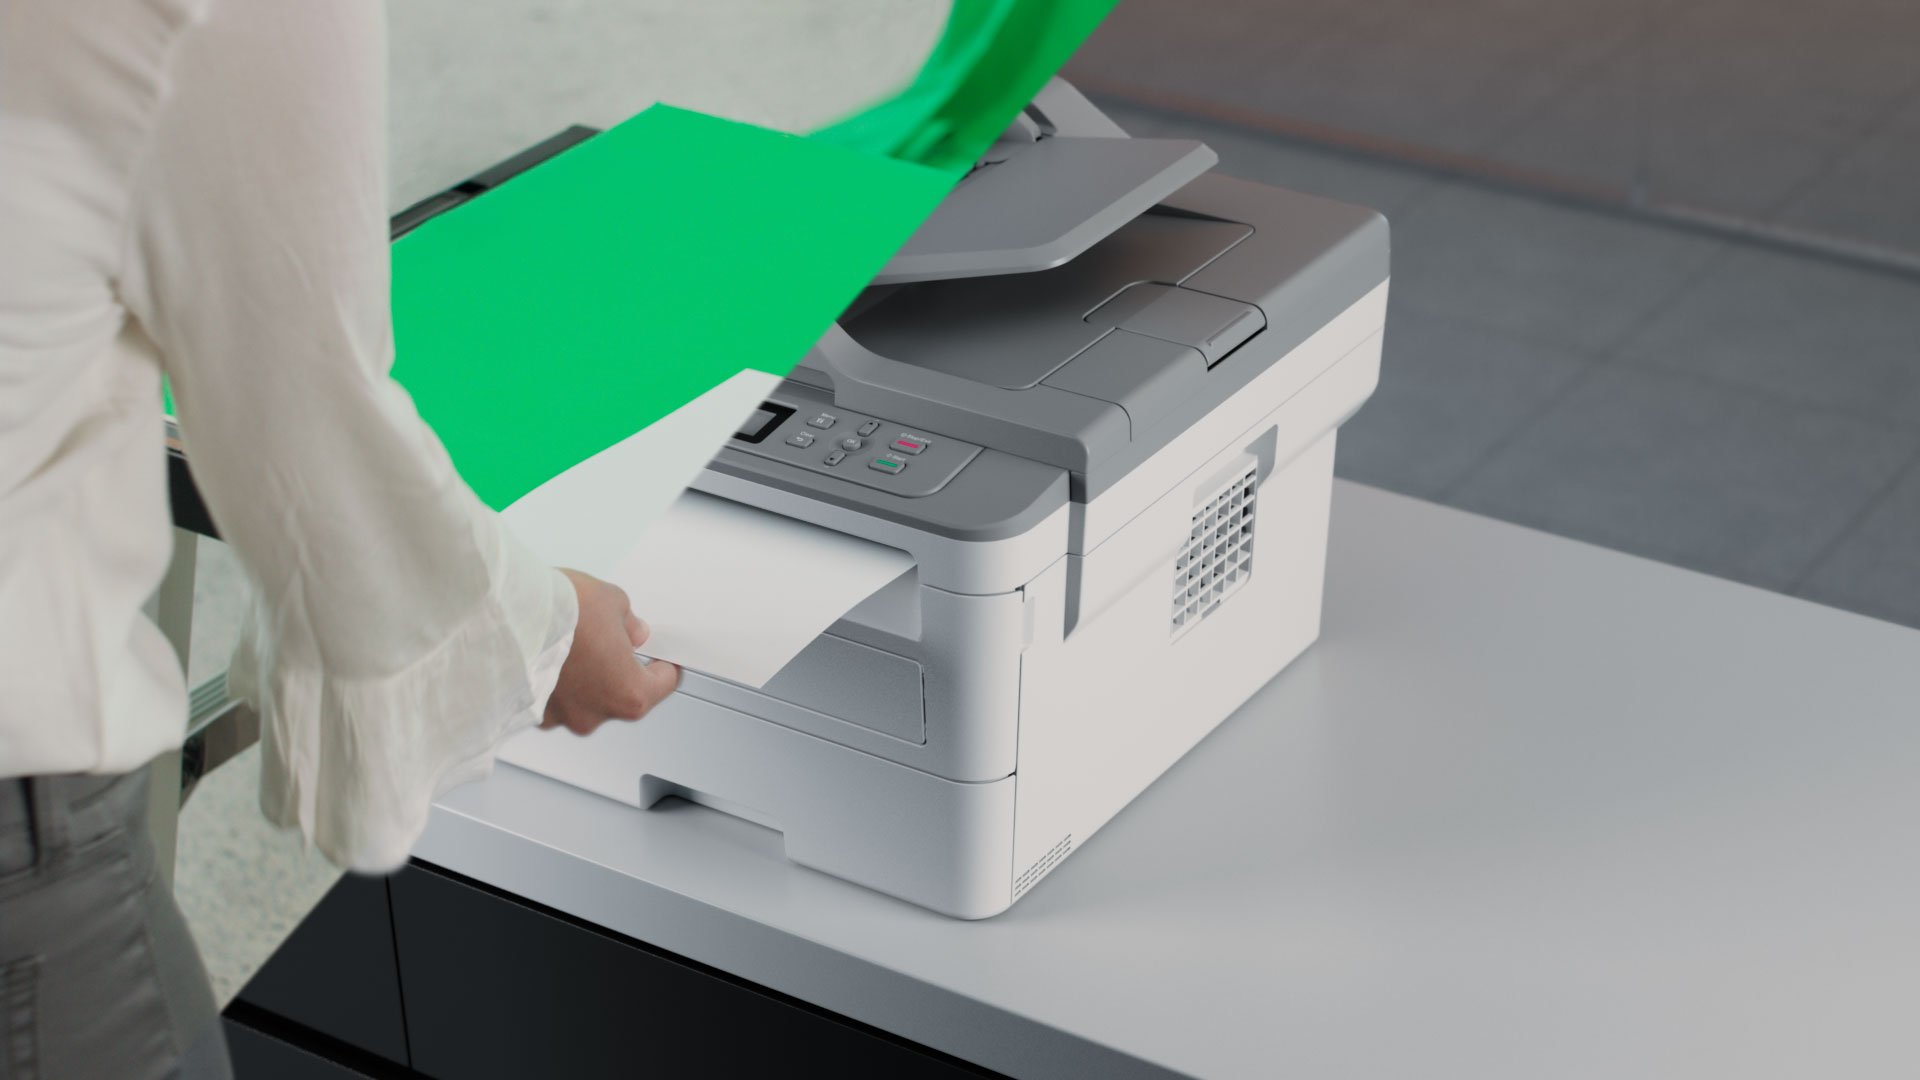 Split view composite of live footage of a person interacting with a CG printer.